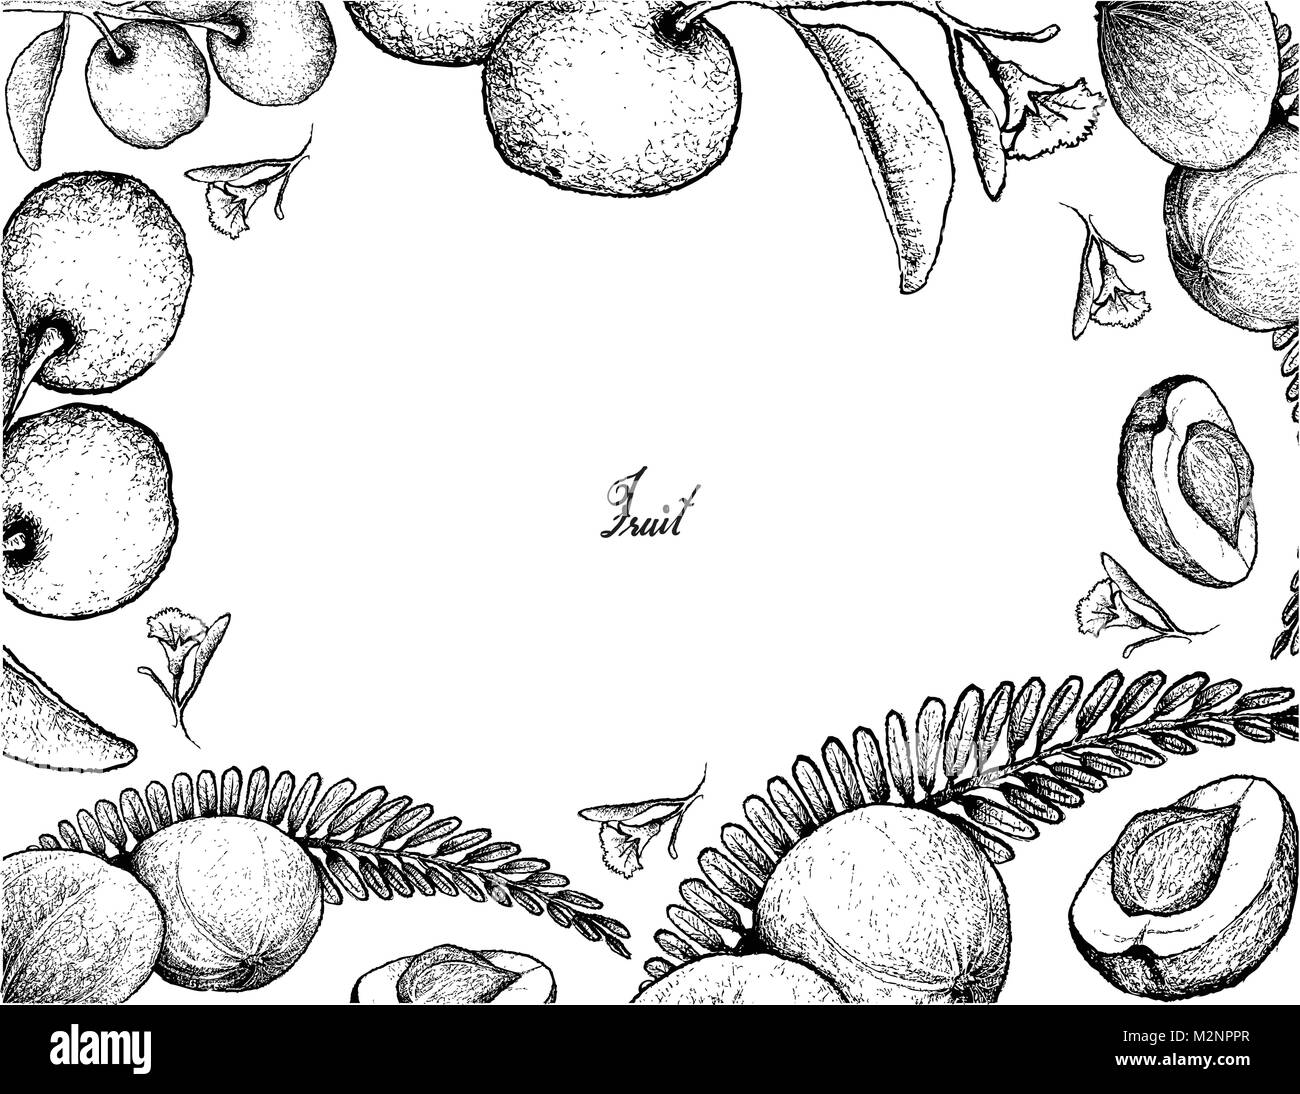 Tropical Fruits, Illustration of Hand Drawn Sketch Frame of Fresh Indian Gooseberry and Tallow Plum Fruits Isolated on White Background. Stock Vector